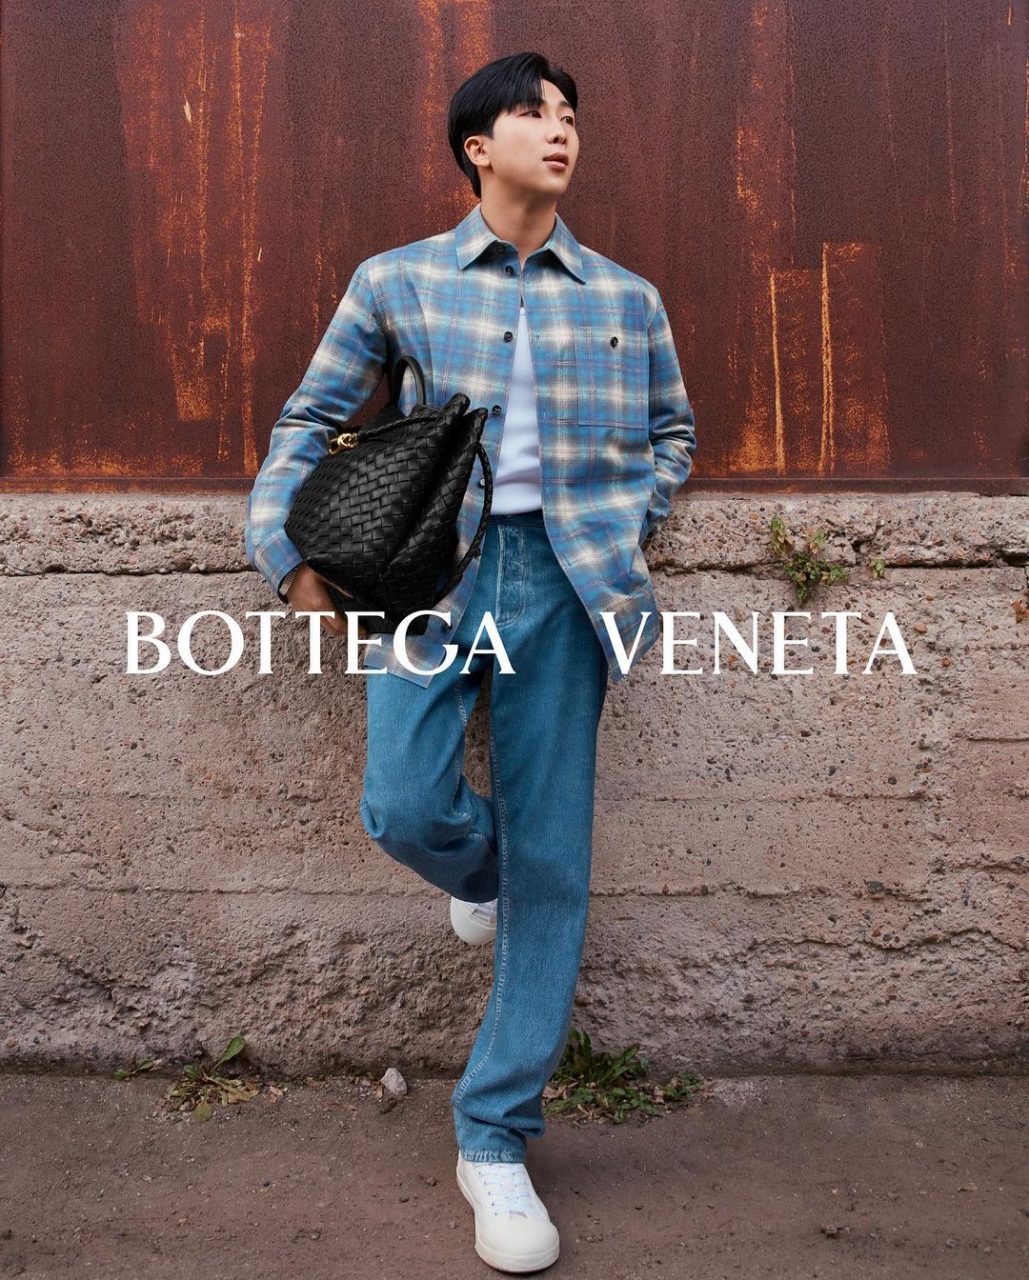 RM has officially been named Bottega Veneta's newest ambassador 🔹RM become  the first and only celebrity brand ambassador for the luxury…